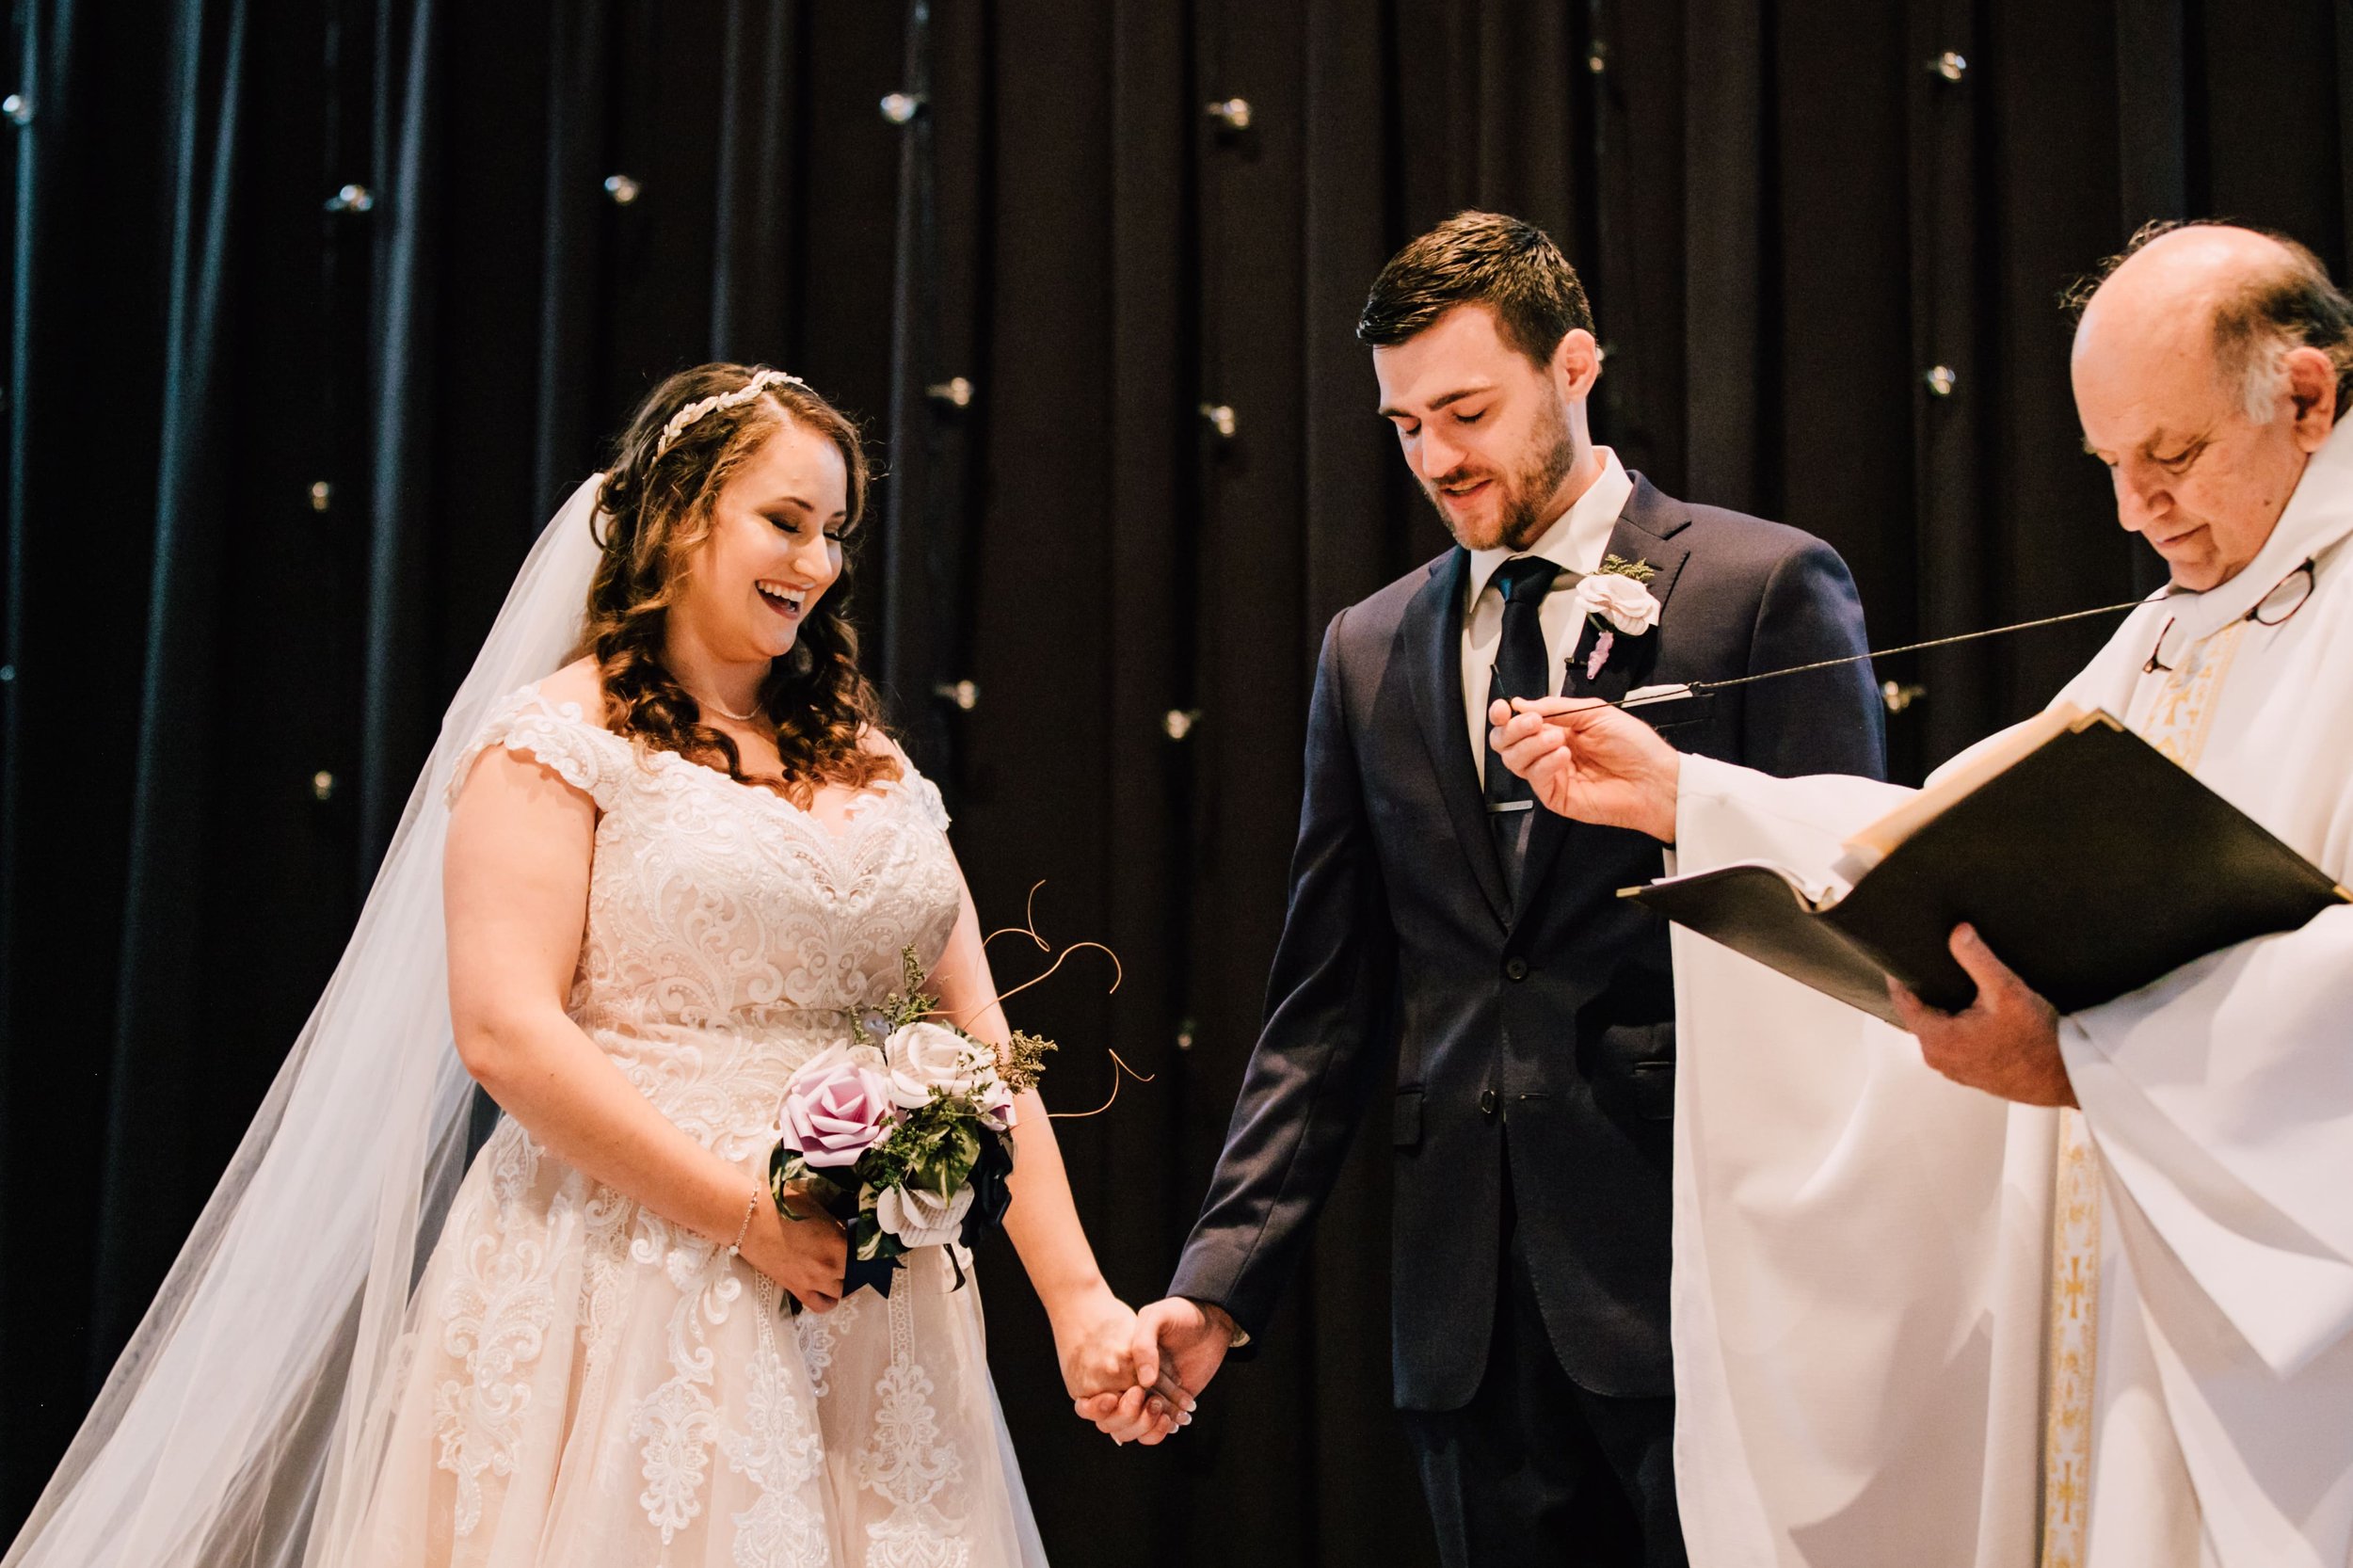  the bride and groom stand hand in hand as their officiant holds out his microphone for them to read their vows. the bride is holding her bouquet of paper wedding flowers  